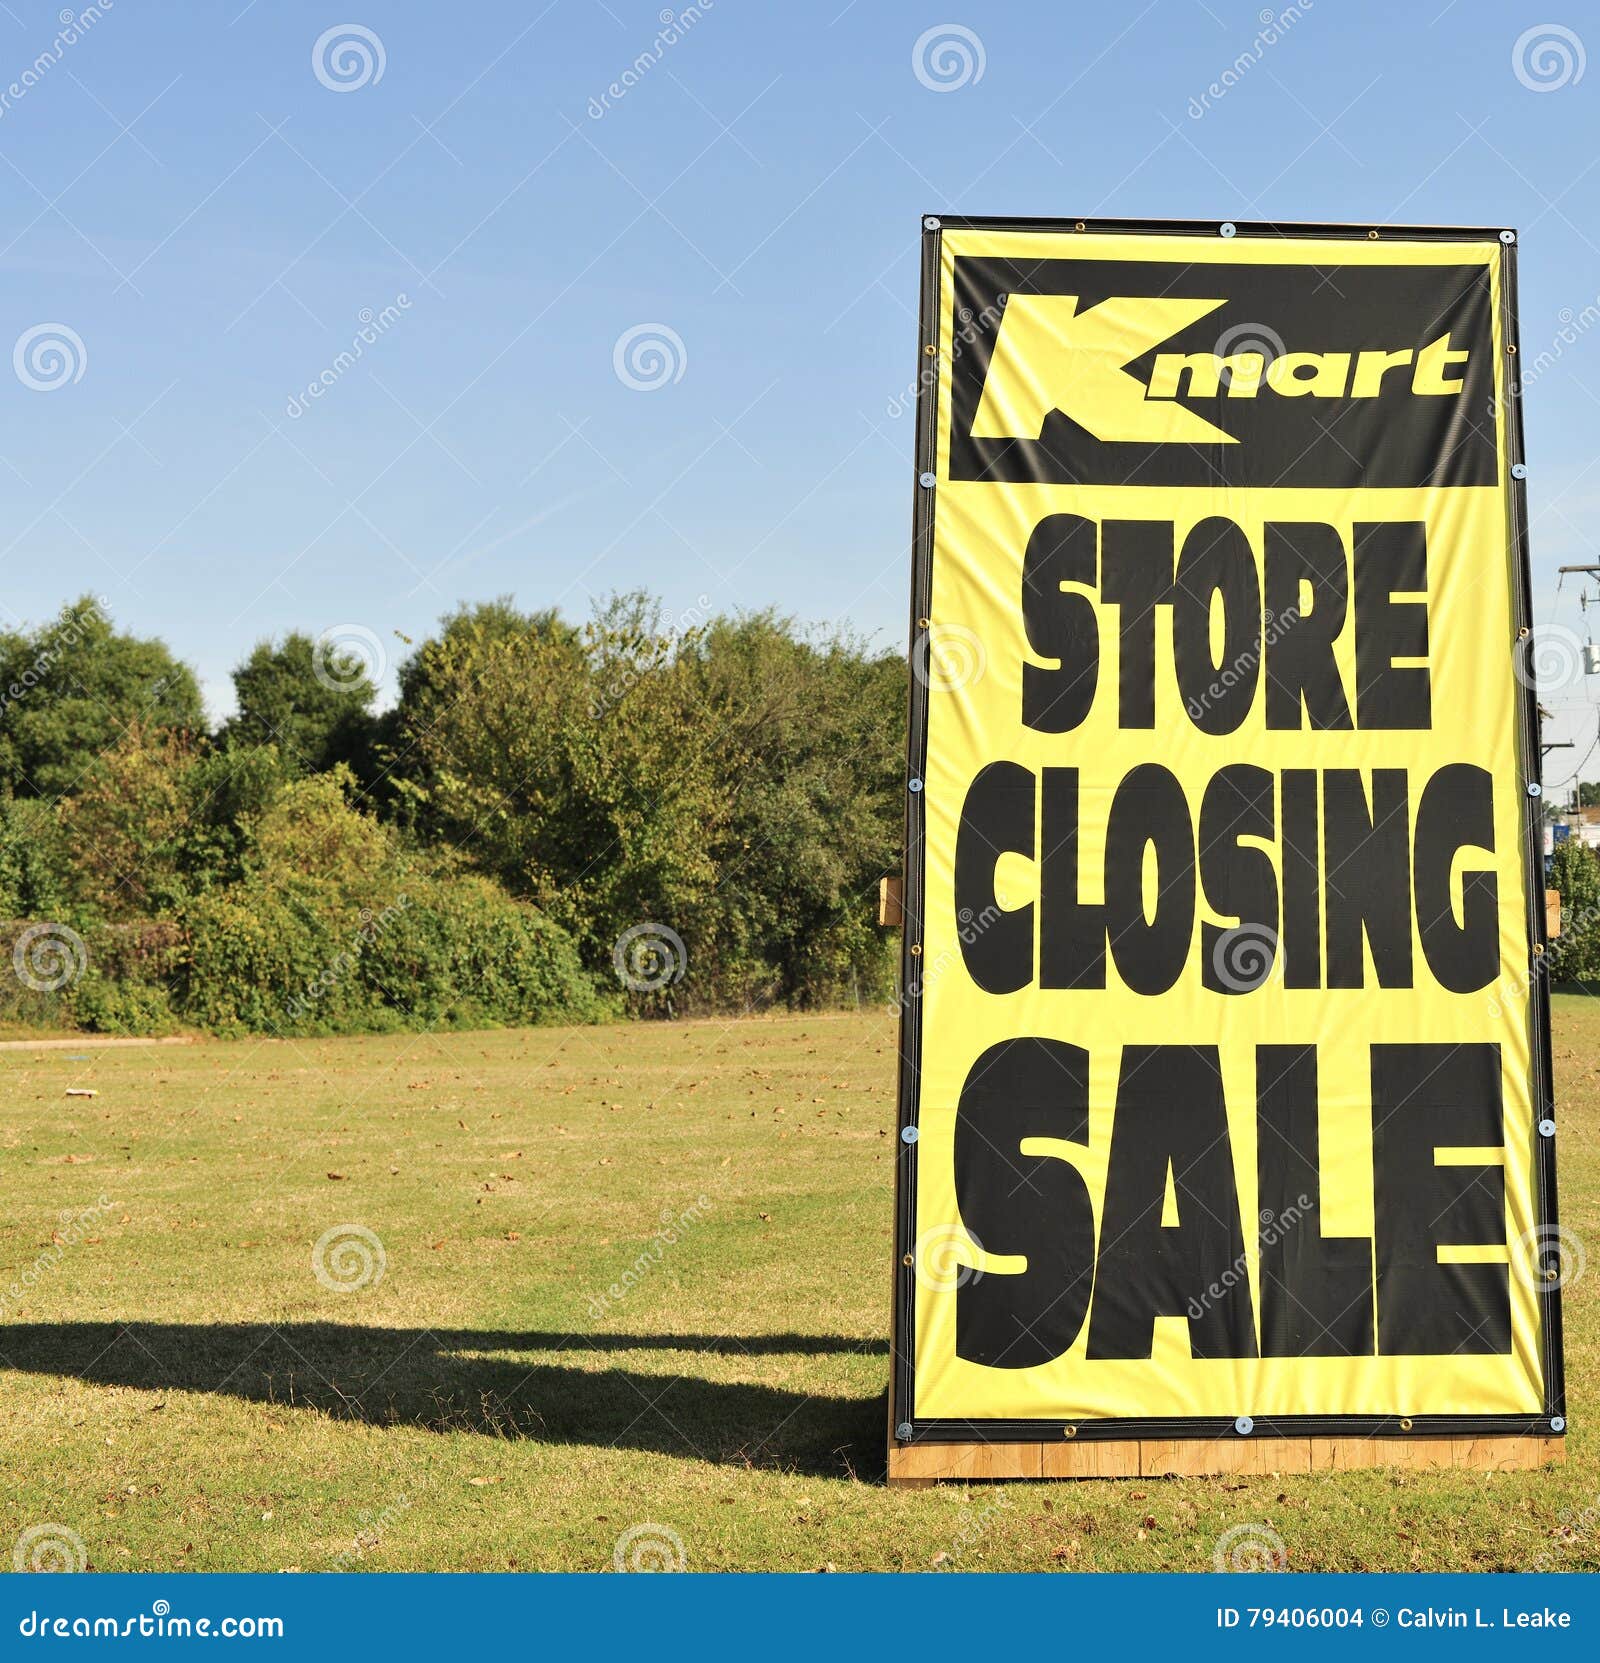 Kmart Store Closing Sign Editorial Stock Image Image Of Mall